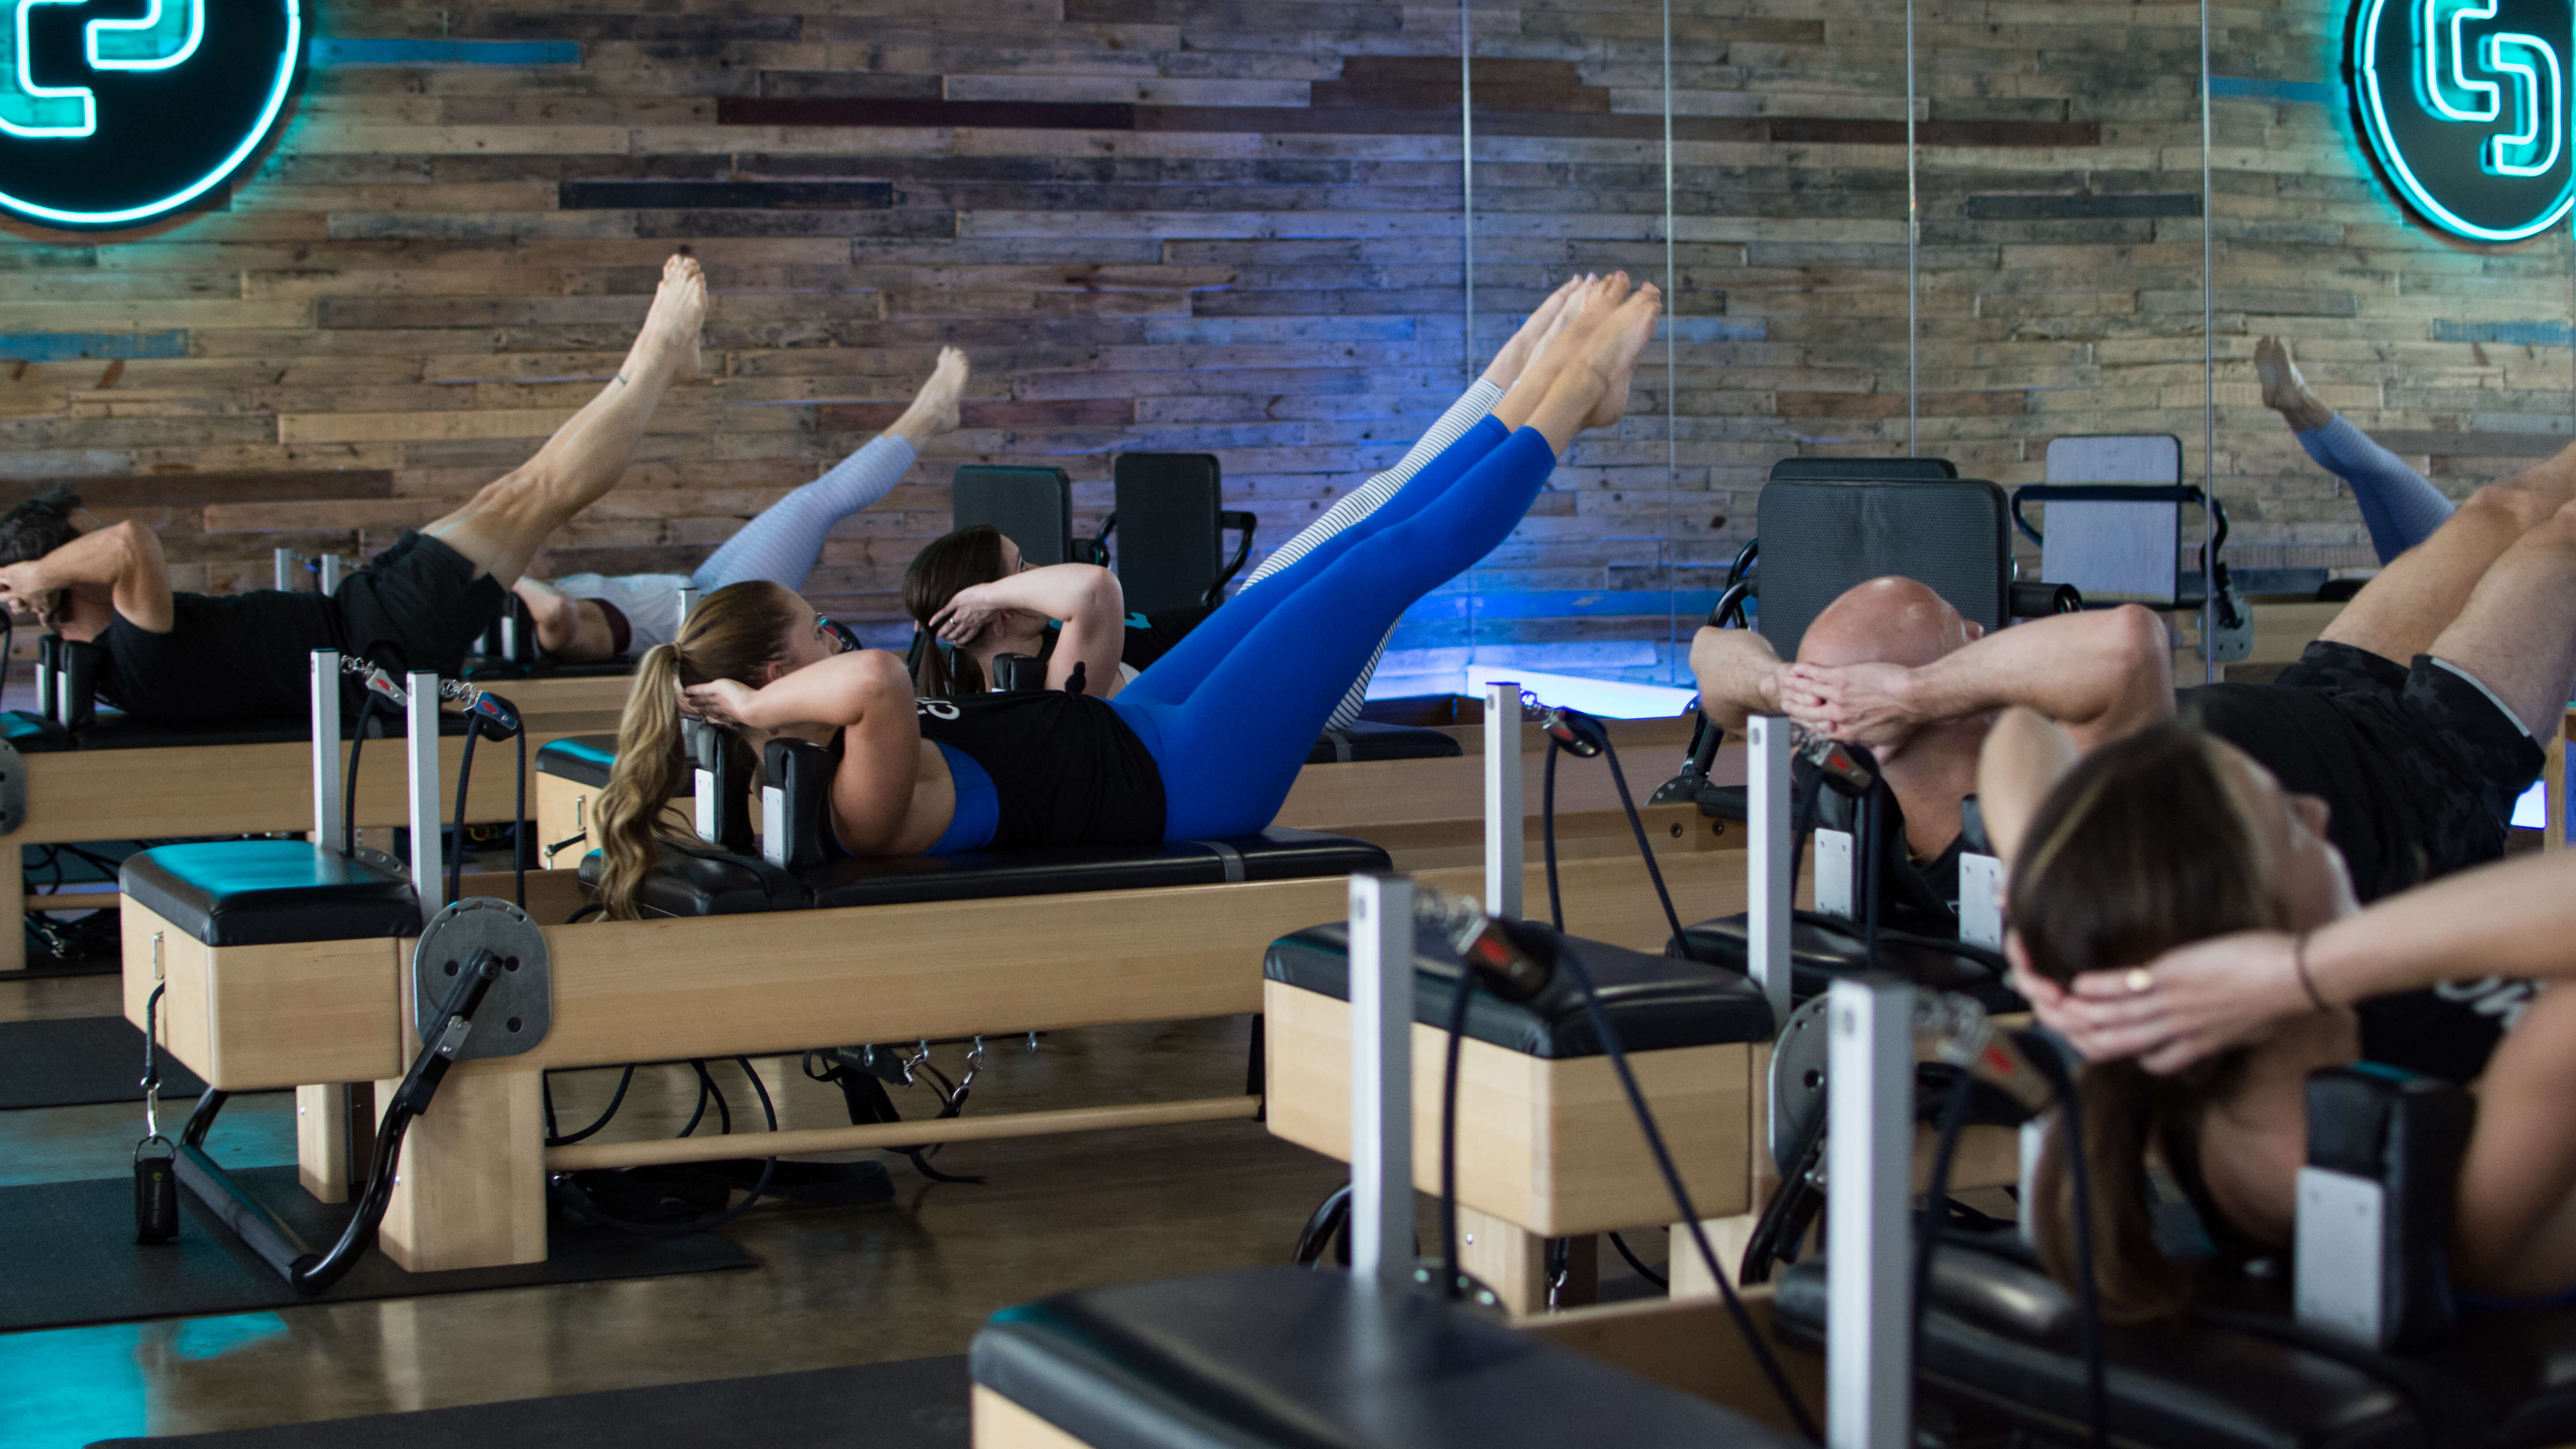 Jumpboard Cardio is THE Citizen solution specifically designed for those who crave a fun, fast-paced cardio class! Our rhythm-based format focuses on amping up your heart rate with TONS of AB WORK! Learn to RUN + JUMP with us on the reformer, tap it twice and find that beat!